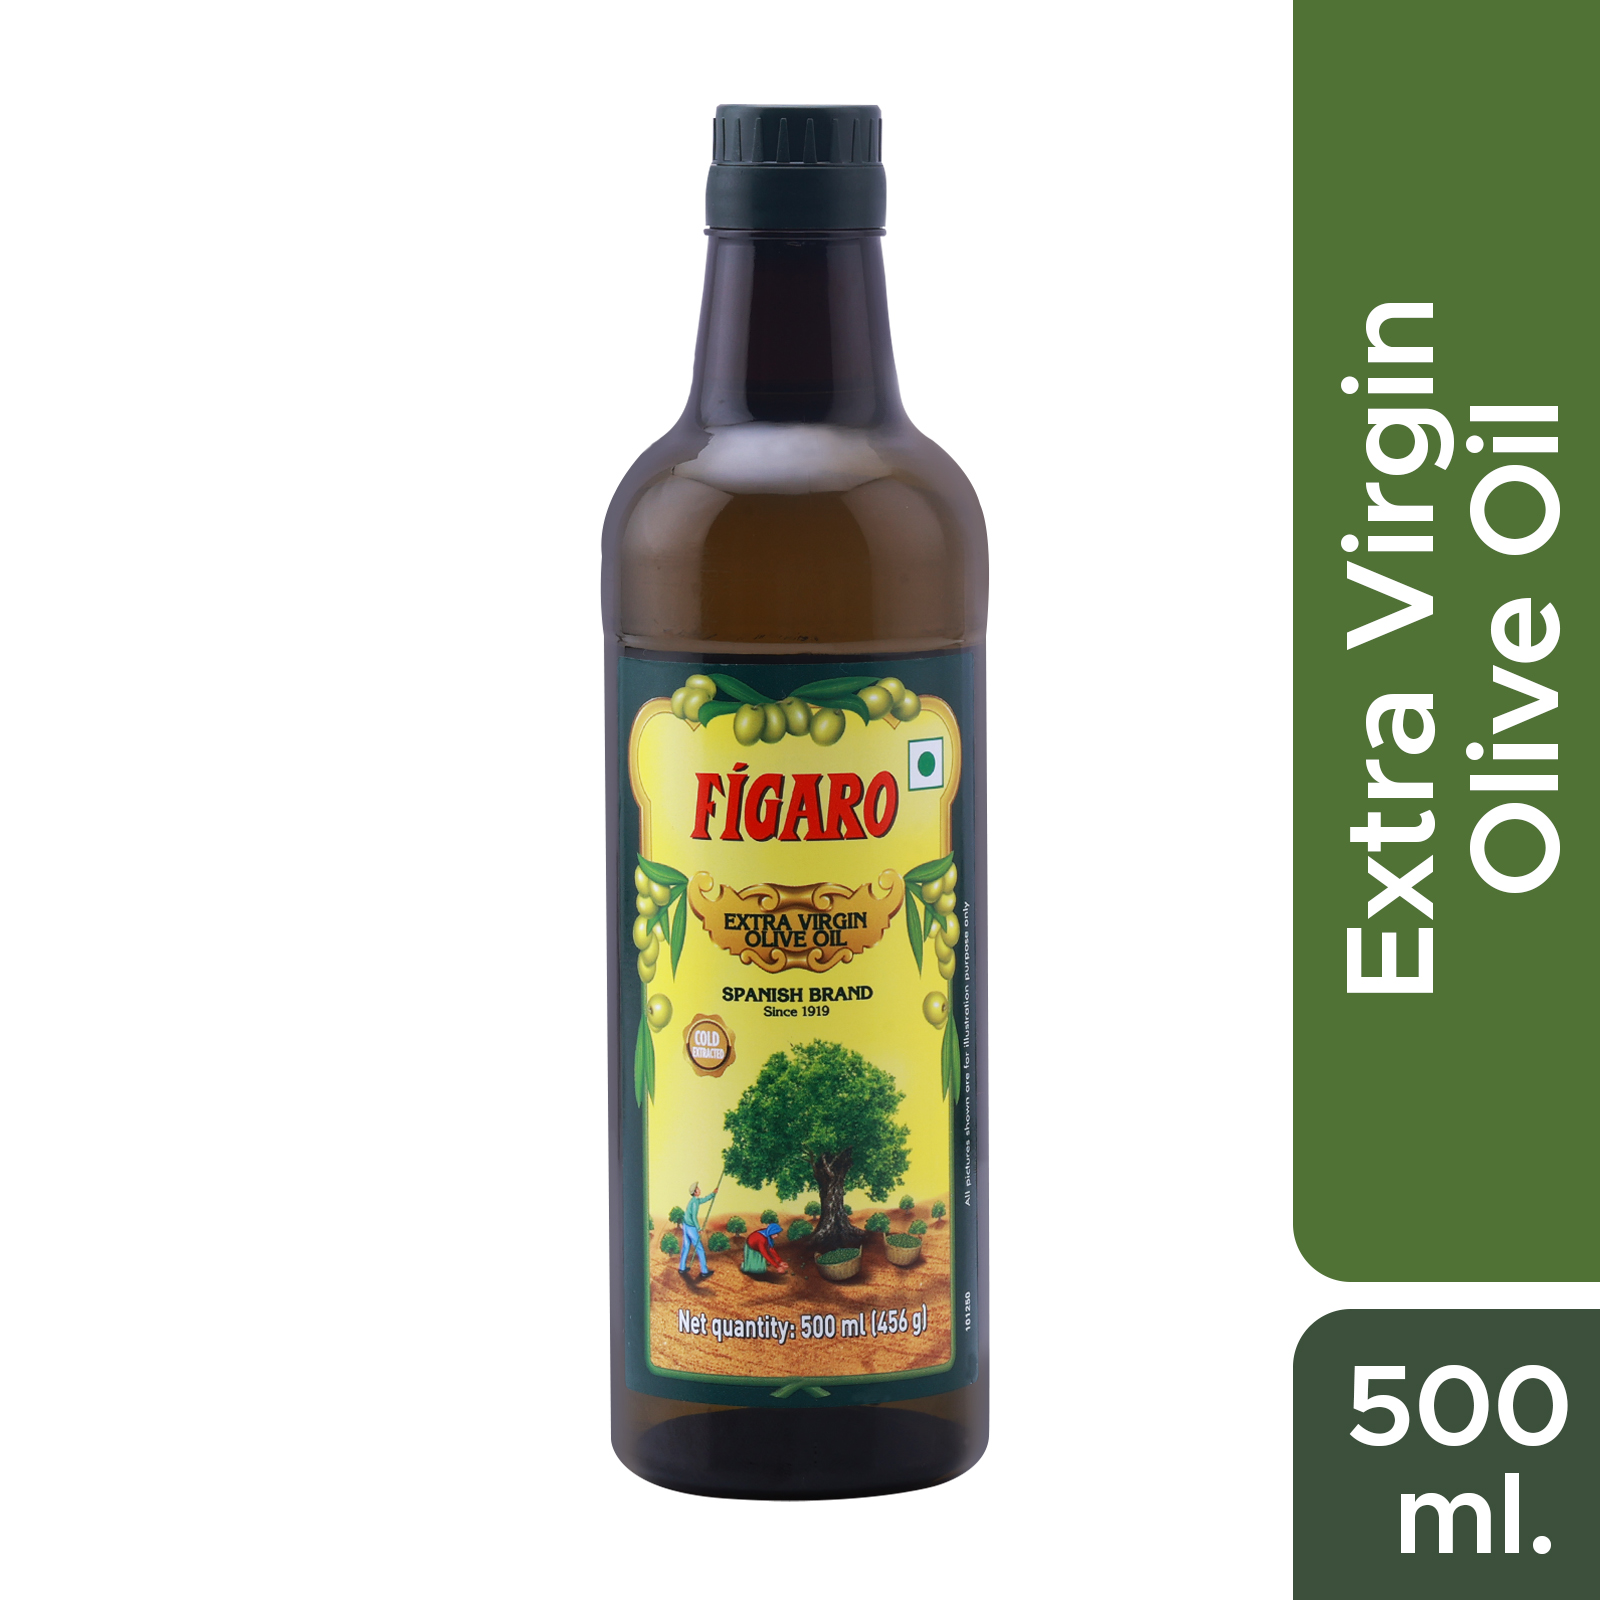 Figaro Extra Virgin Olive Oil – 500ml PRODUCT ID: 2373